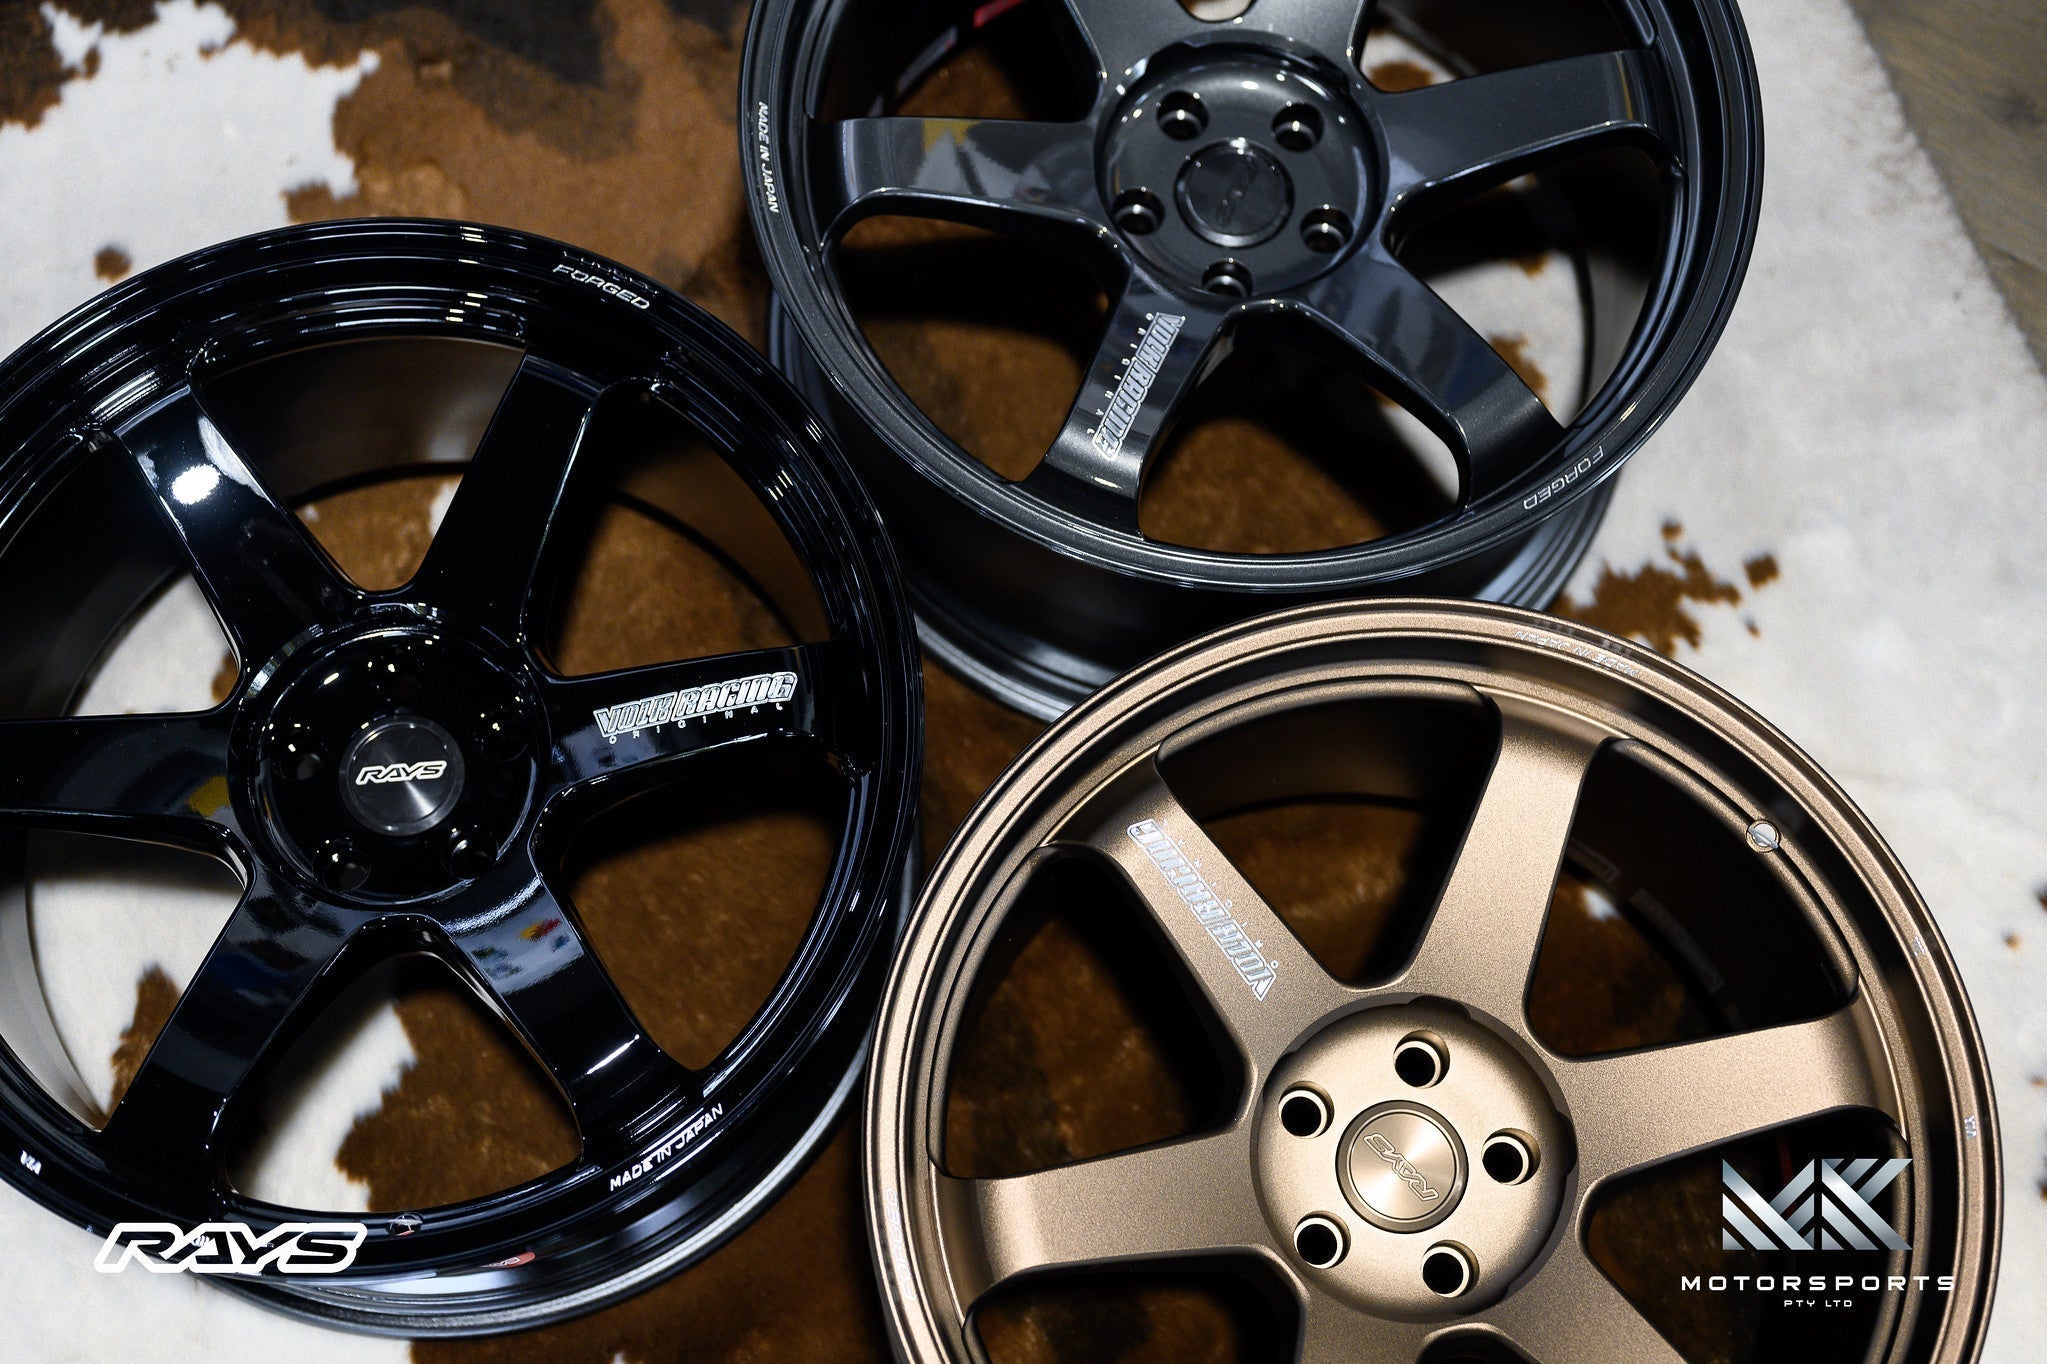 Volk Racing TE37 Ultra M-Spec for A90 - Premium Wheels from Volk Racing - From just $5090.00! Shop now at MK MOTORSPORTS